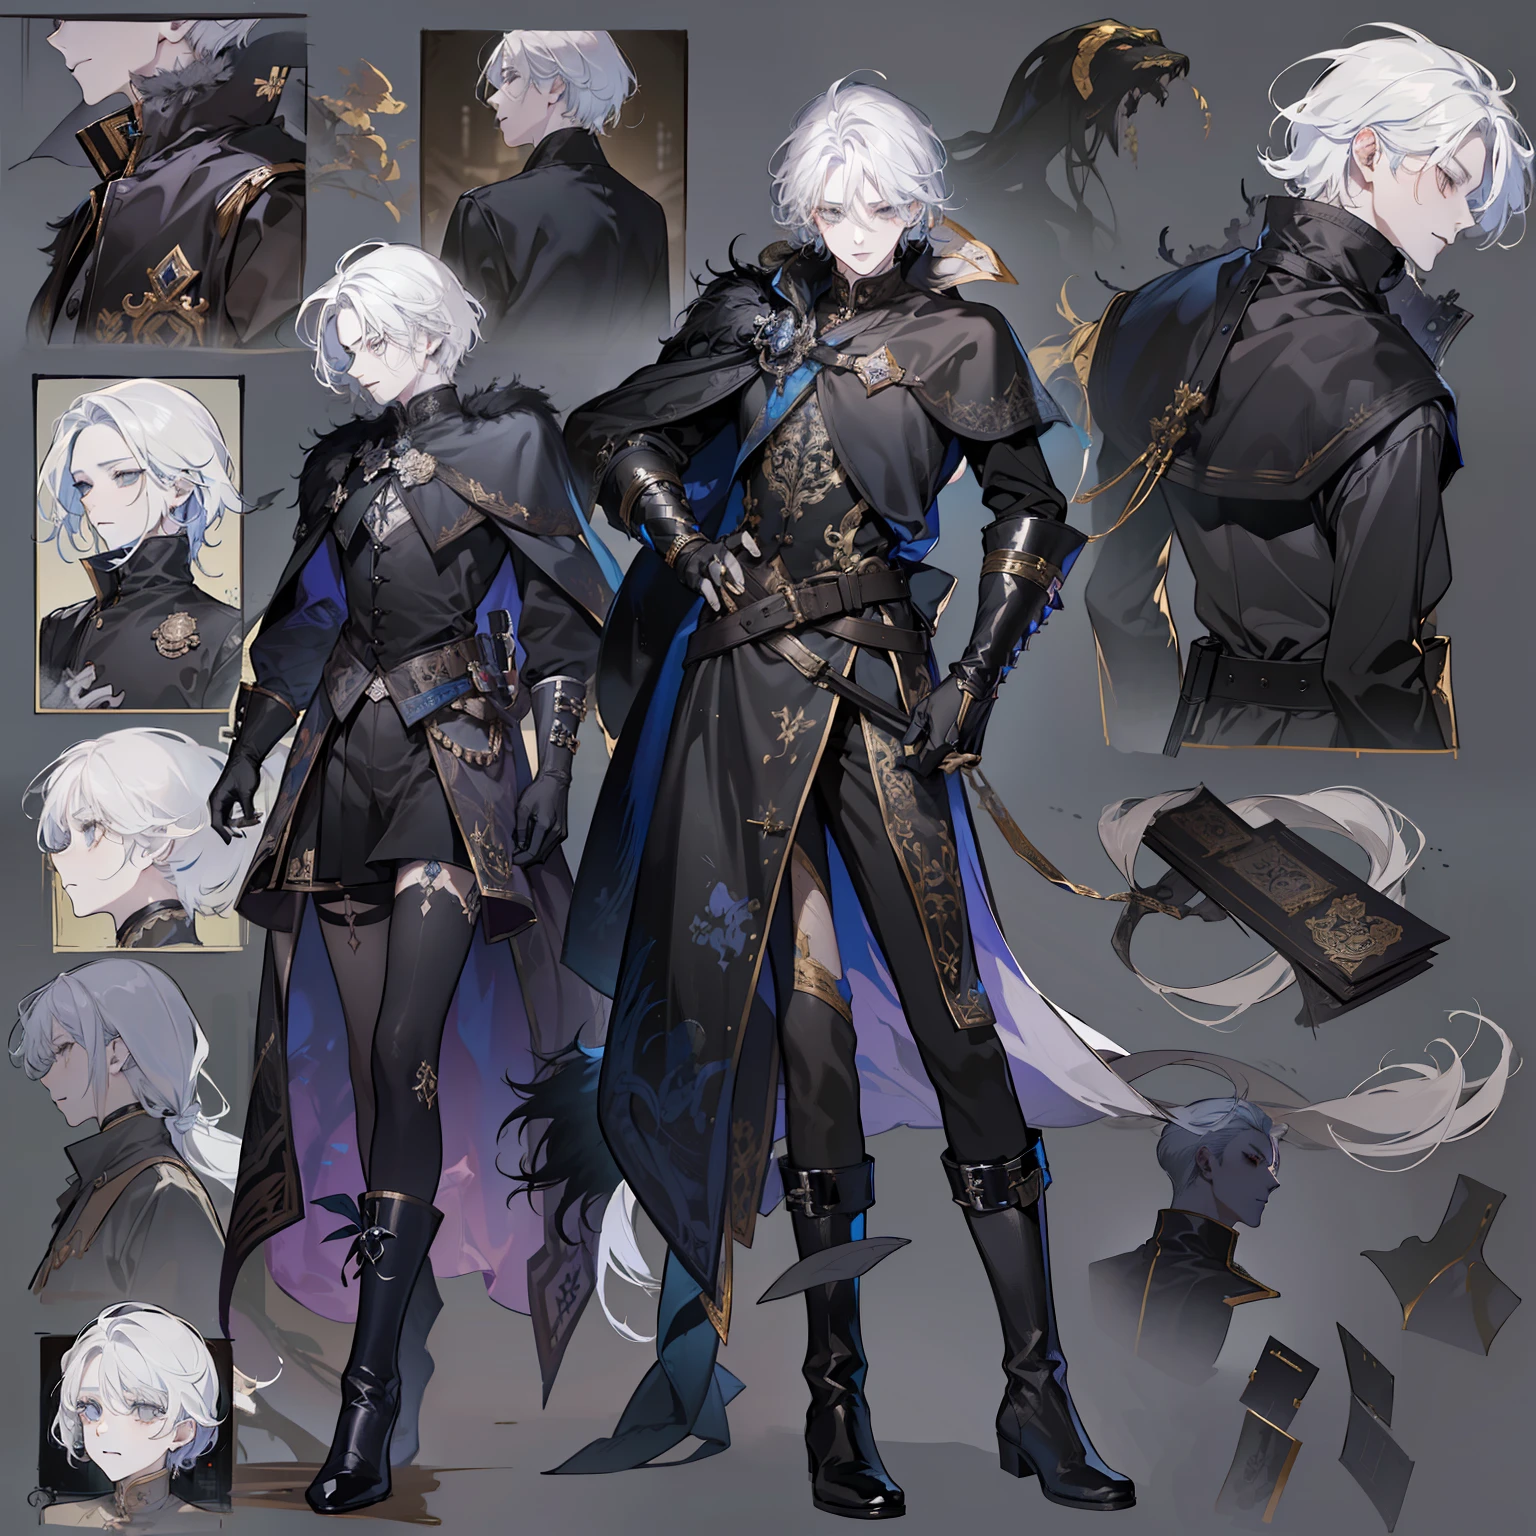 1 boy, solo, white hair, short hair, gray eyes, black shirt, metal cuffs, black gloves, high boots, metal gloves, medieval theme, looking at viewer, fantasy art, beautiful painting, guwaika style, epic exquisite character art, stunning characters, (reference sheet:1.5)